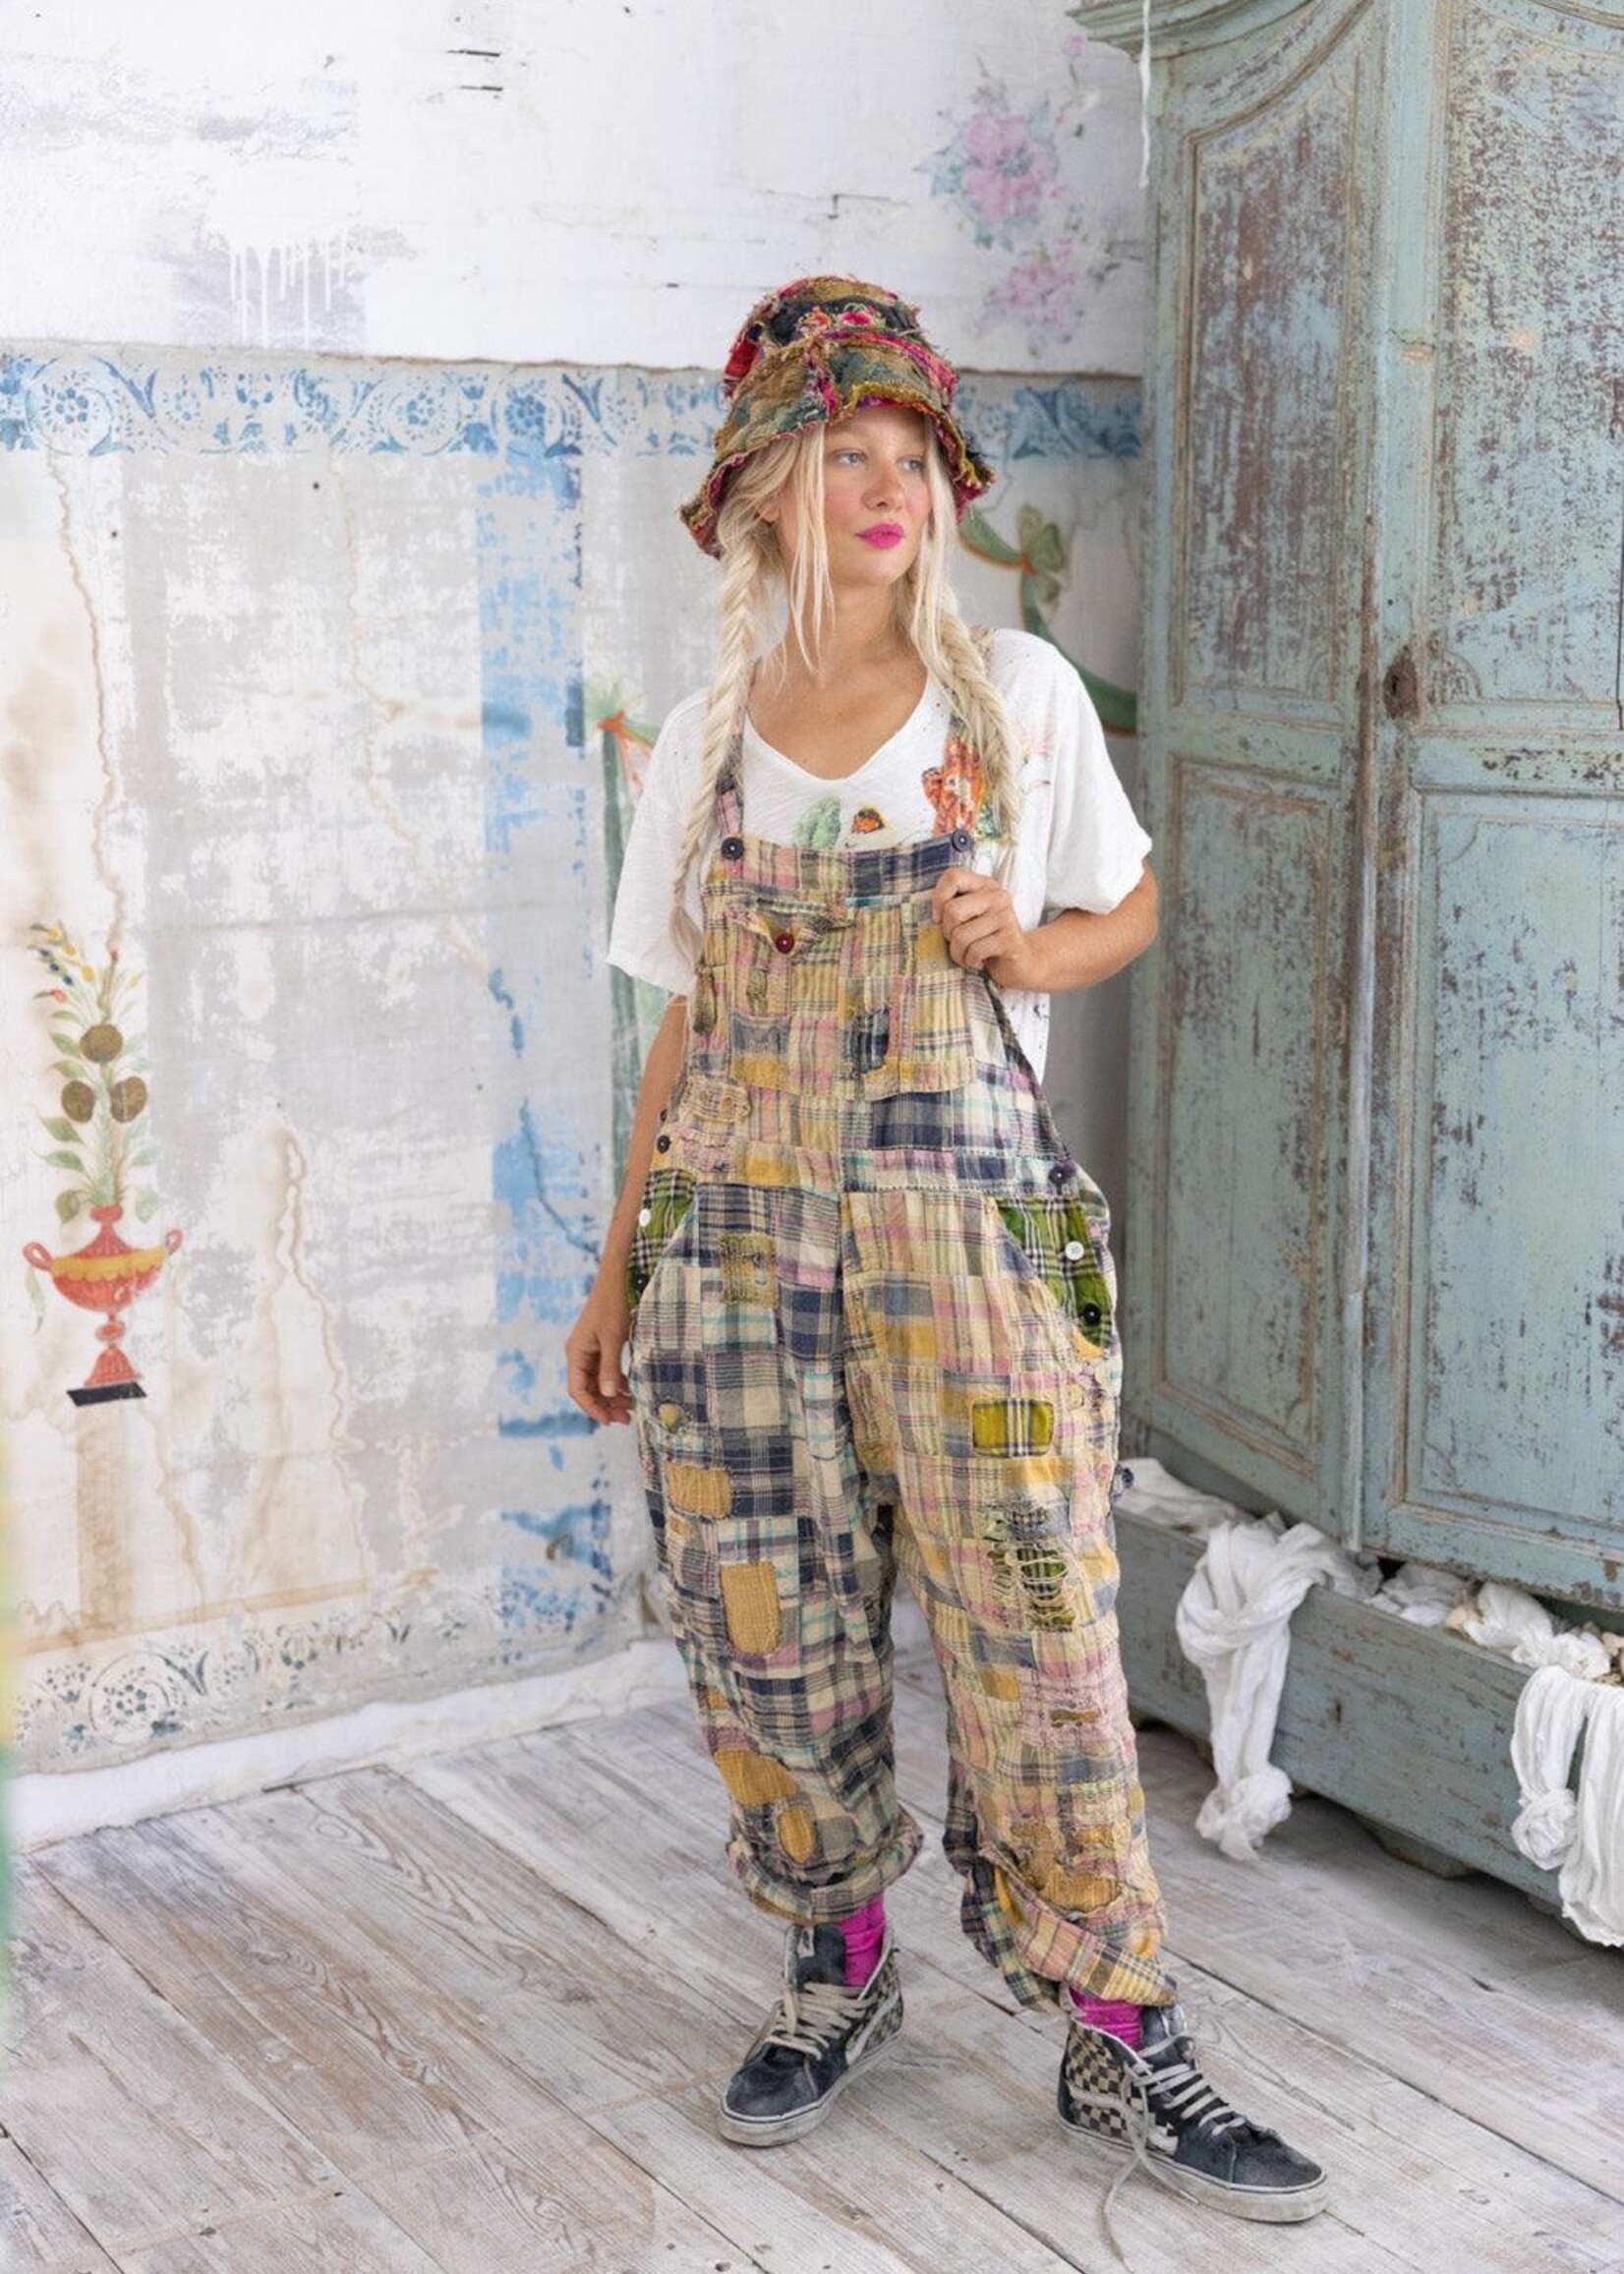 Magnolia Pearl PATCHWORK LOVE OVERALLS MADRAS TROPICAL